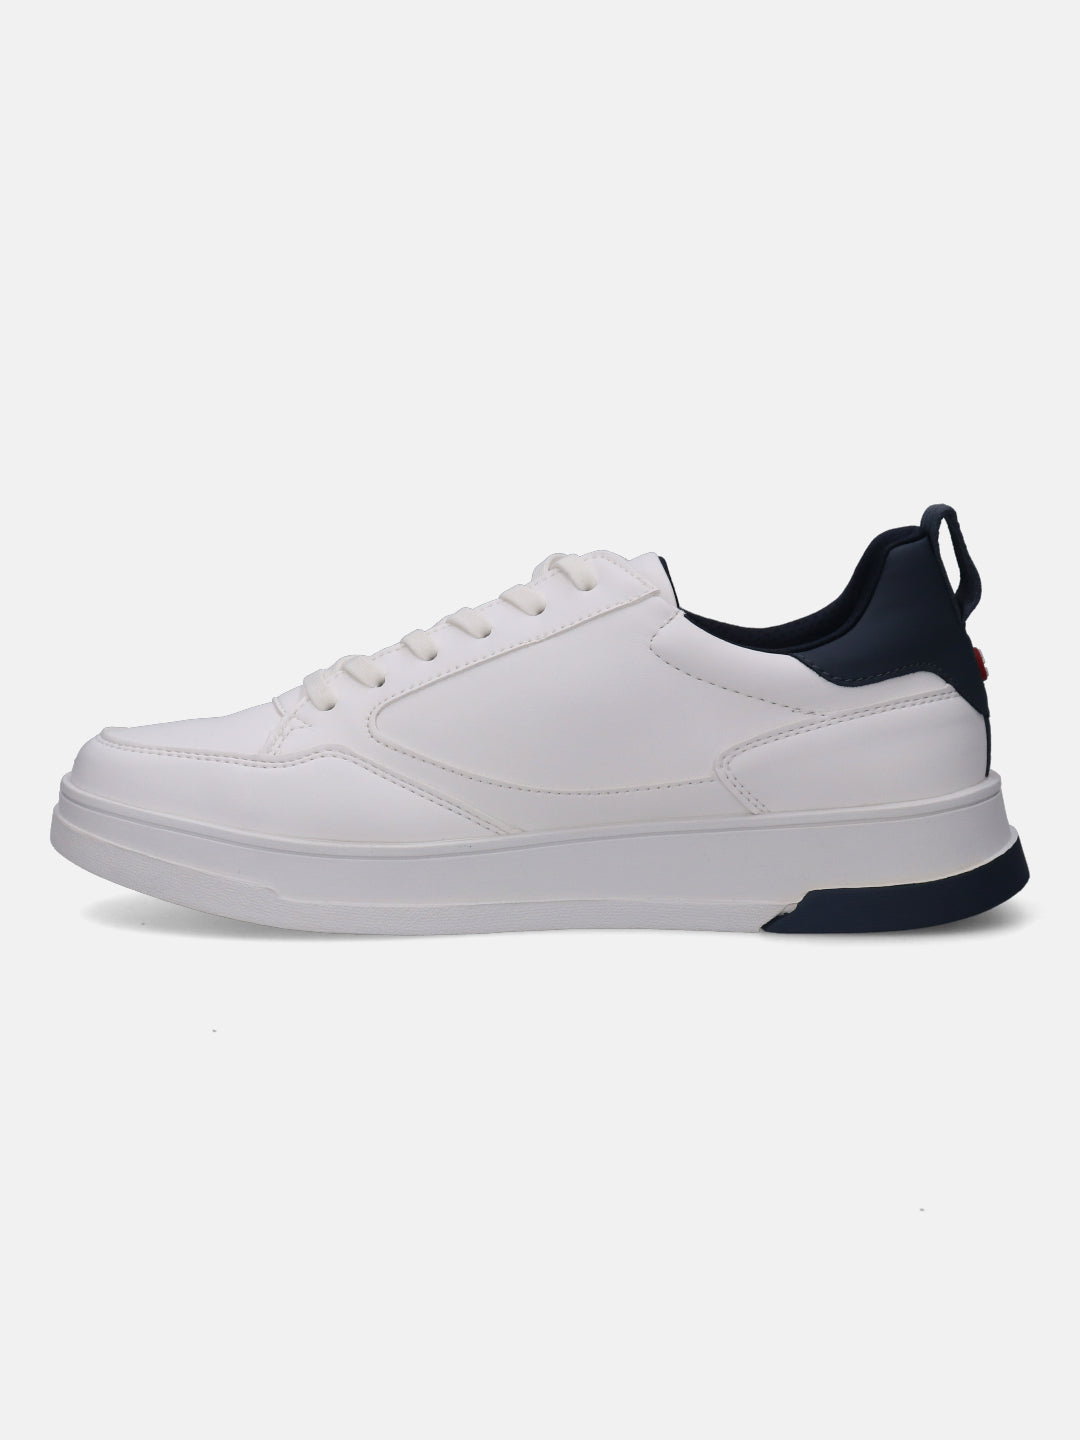 Nike Airforce Off White Shoes For Men at Rs 3399/pair | Dwarka | Delhi |  ID: 22789785530